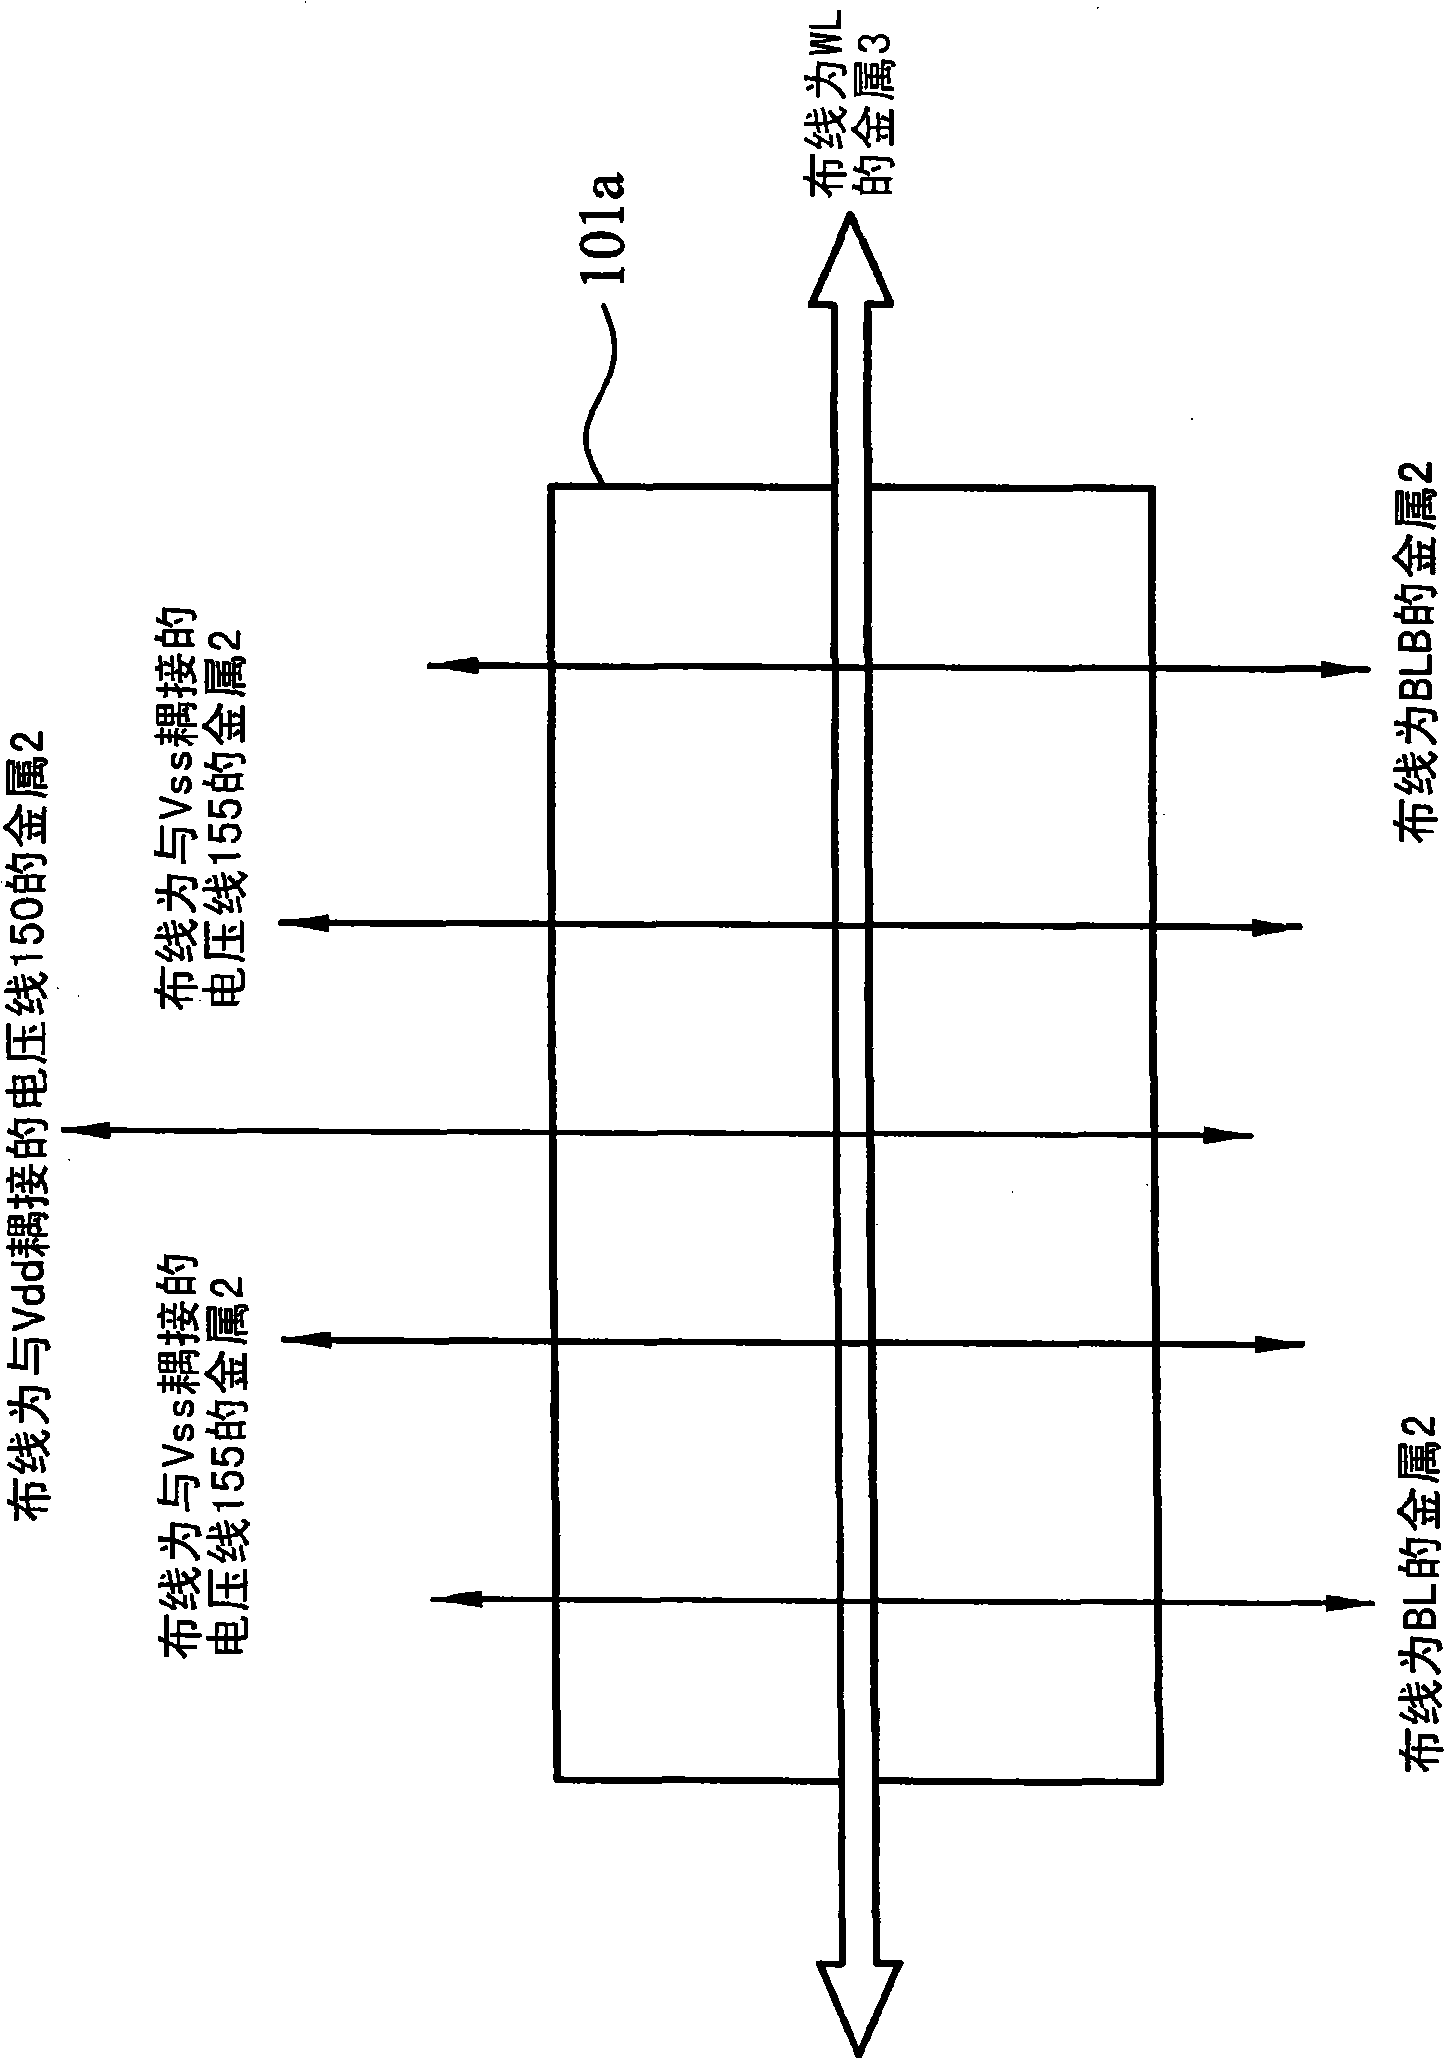 Memory circuits and routing of conductive layers thereof